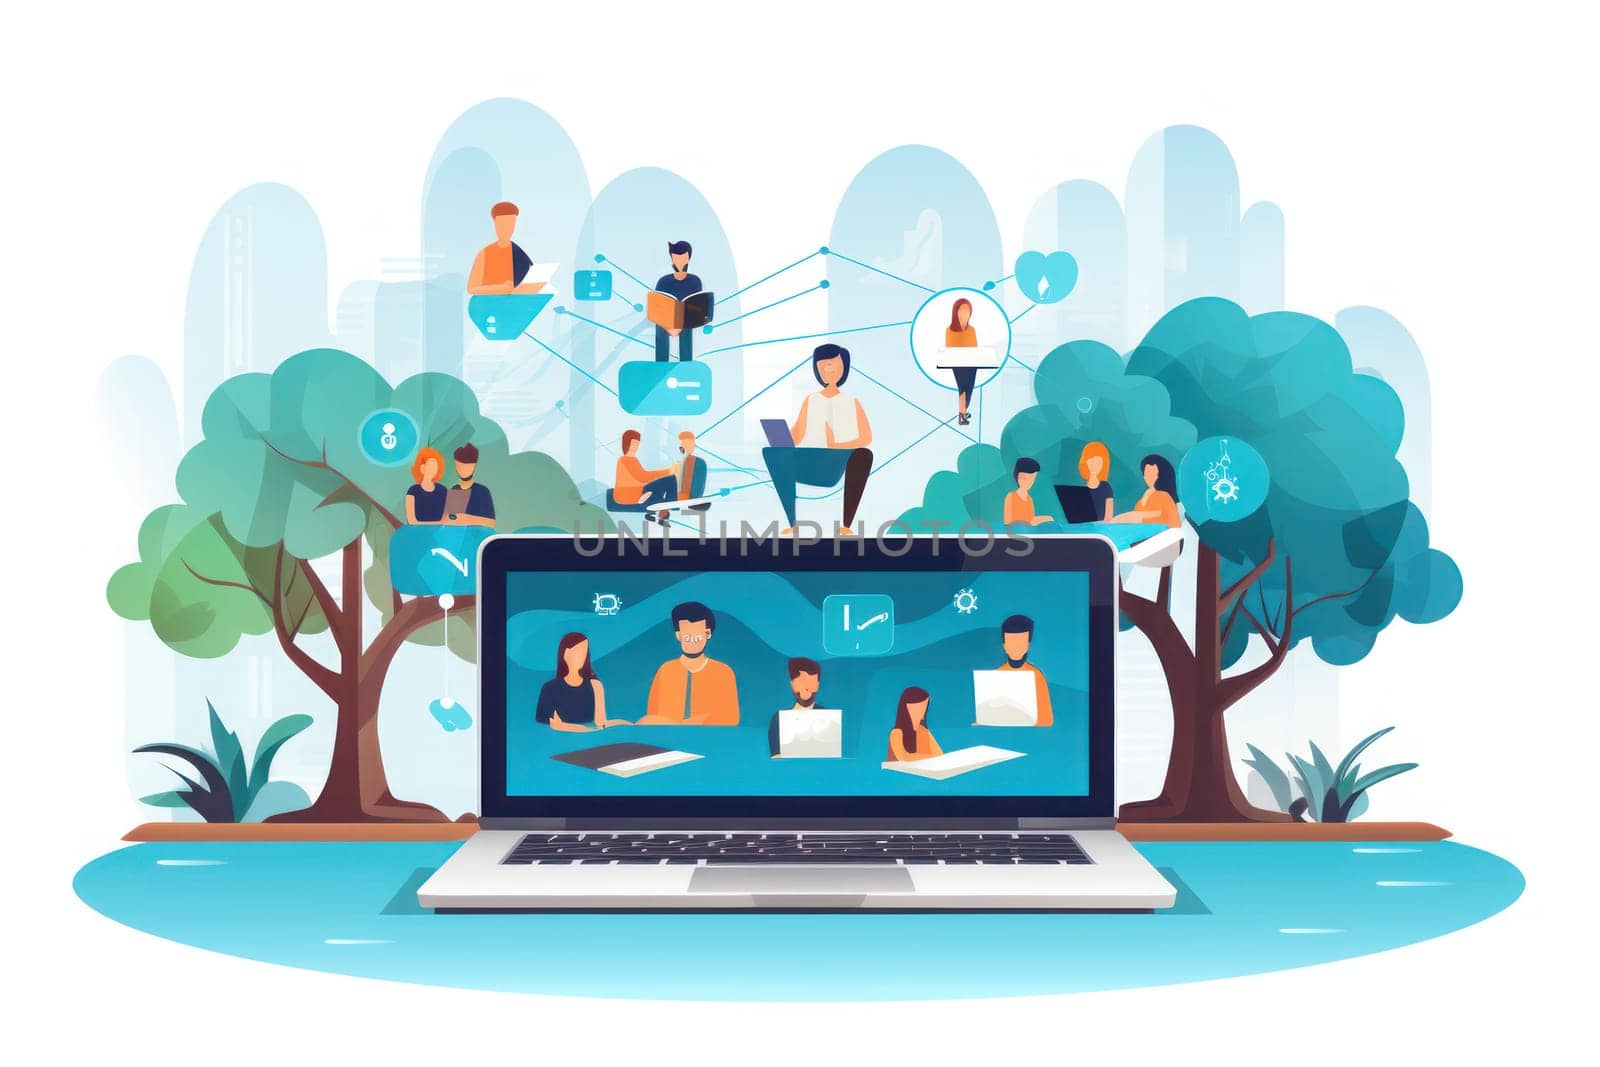 People connecting together, learning or meeting online with teleconference